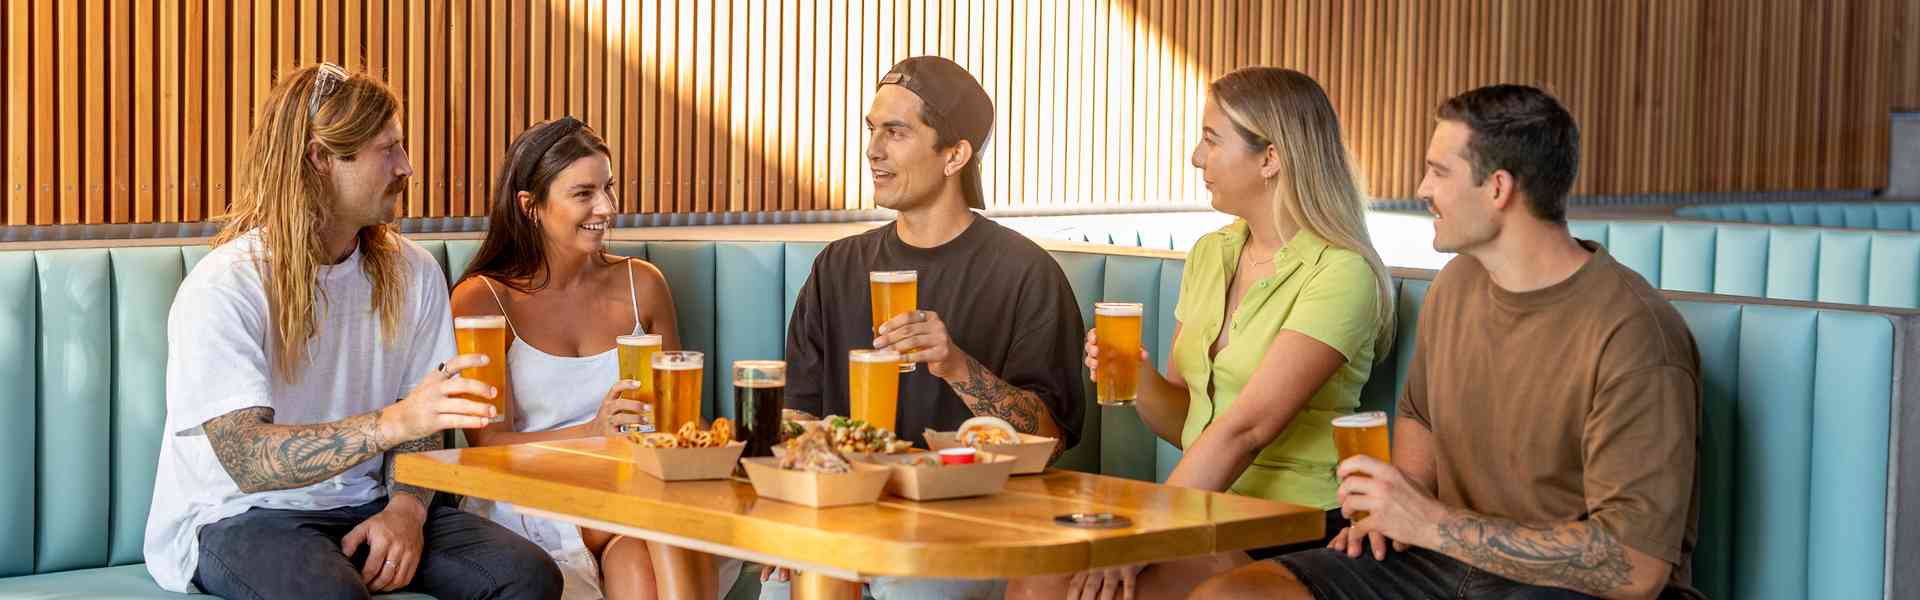 10 of Gold Coast's Finest Breweries You Must Visit